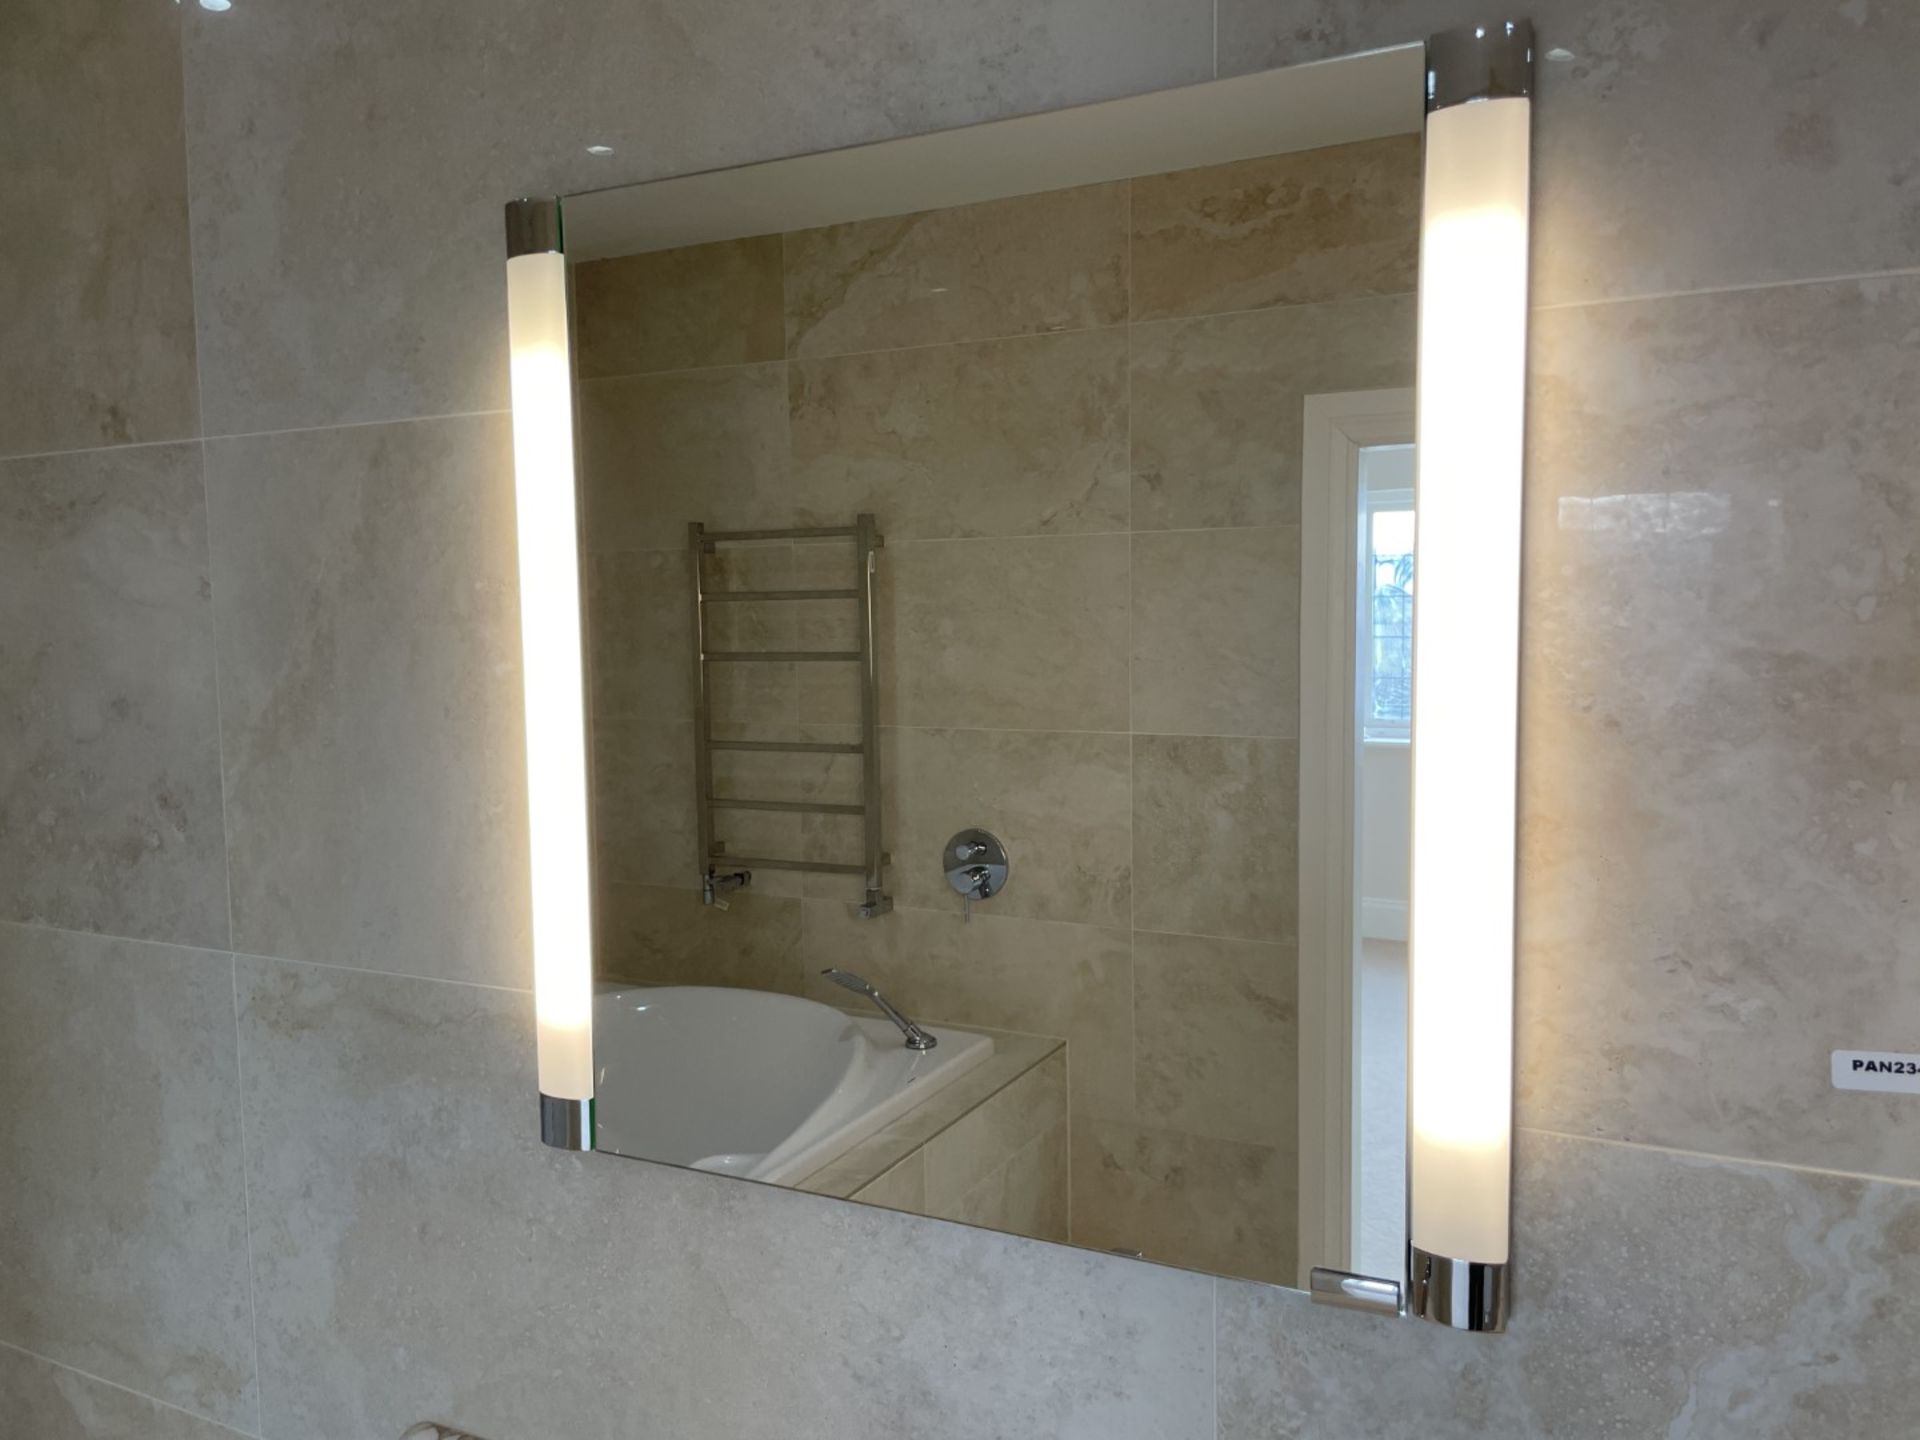 2 x KEUCO Illuminated Mirrored Wall Mounted Cabinets - Total Original Value: £2,000 - Ref: - Image 19 of 19